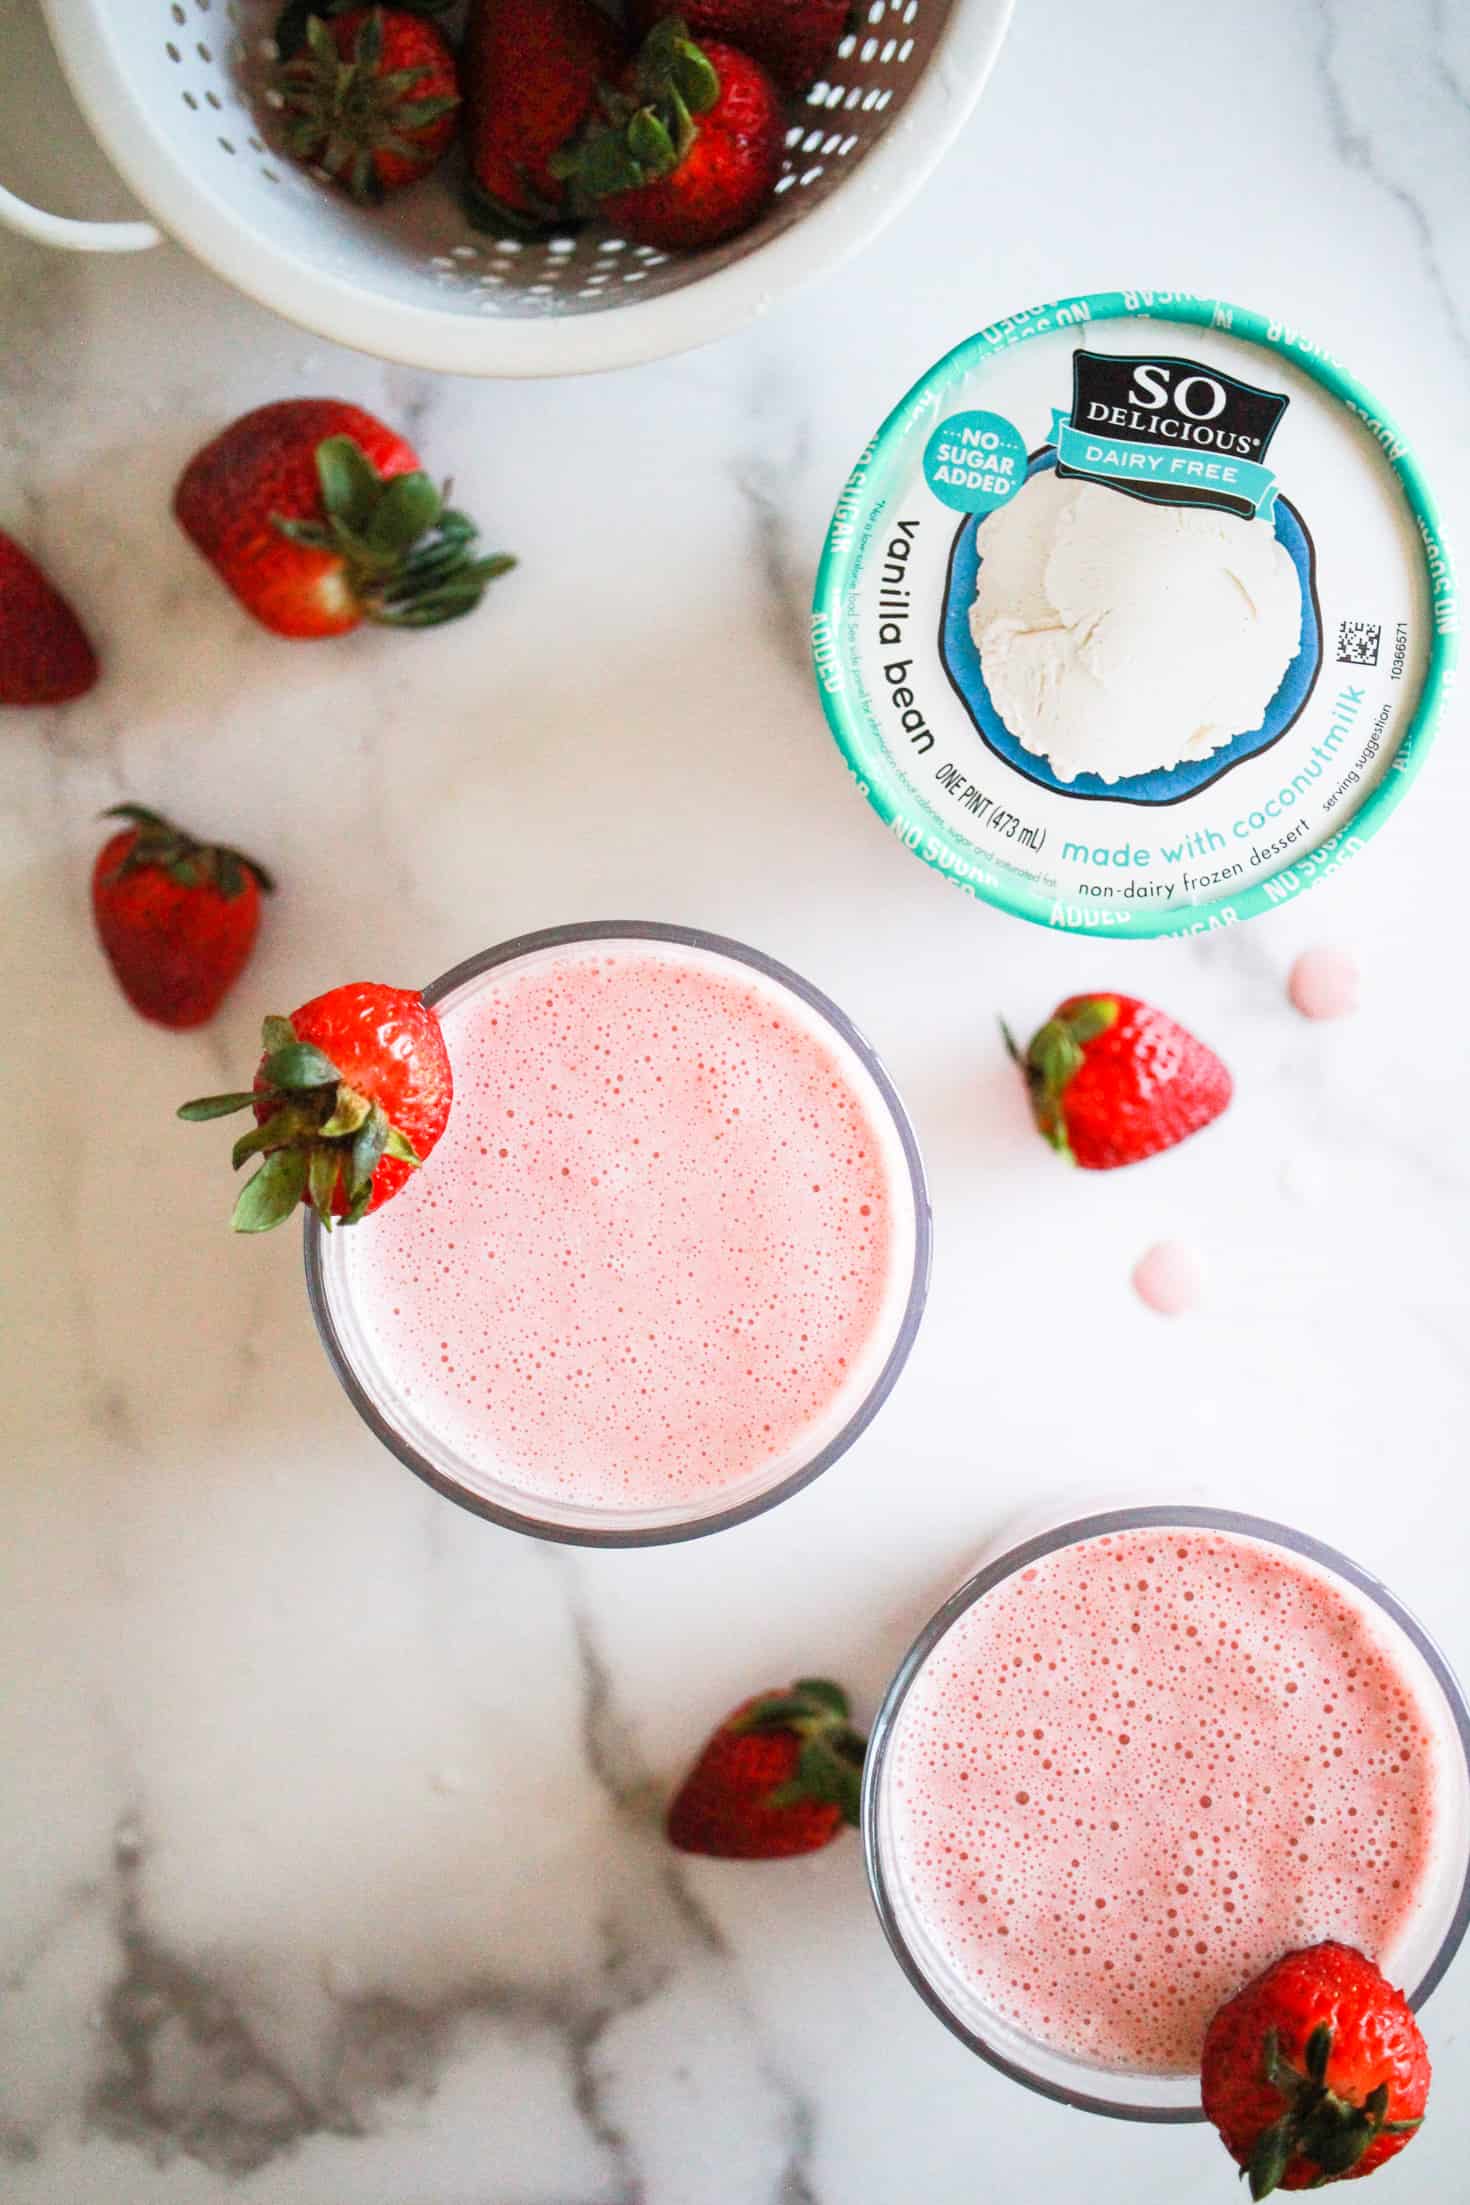 Two strawberry milkshakes with a pint of So Delicious Coconutmilk Ice Cream Alternative and fresh strawberries.